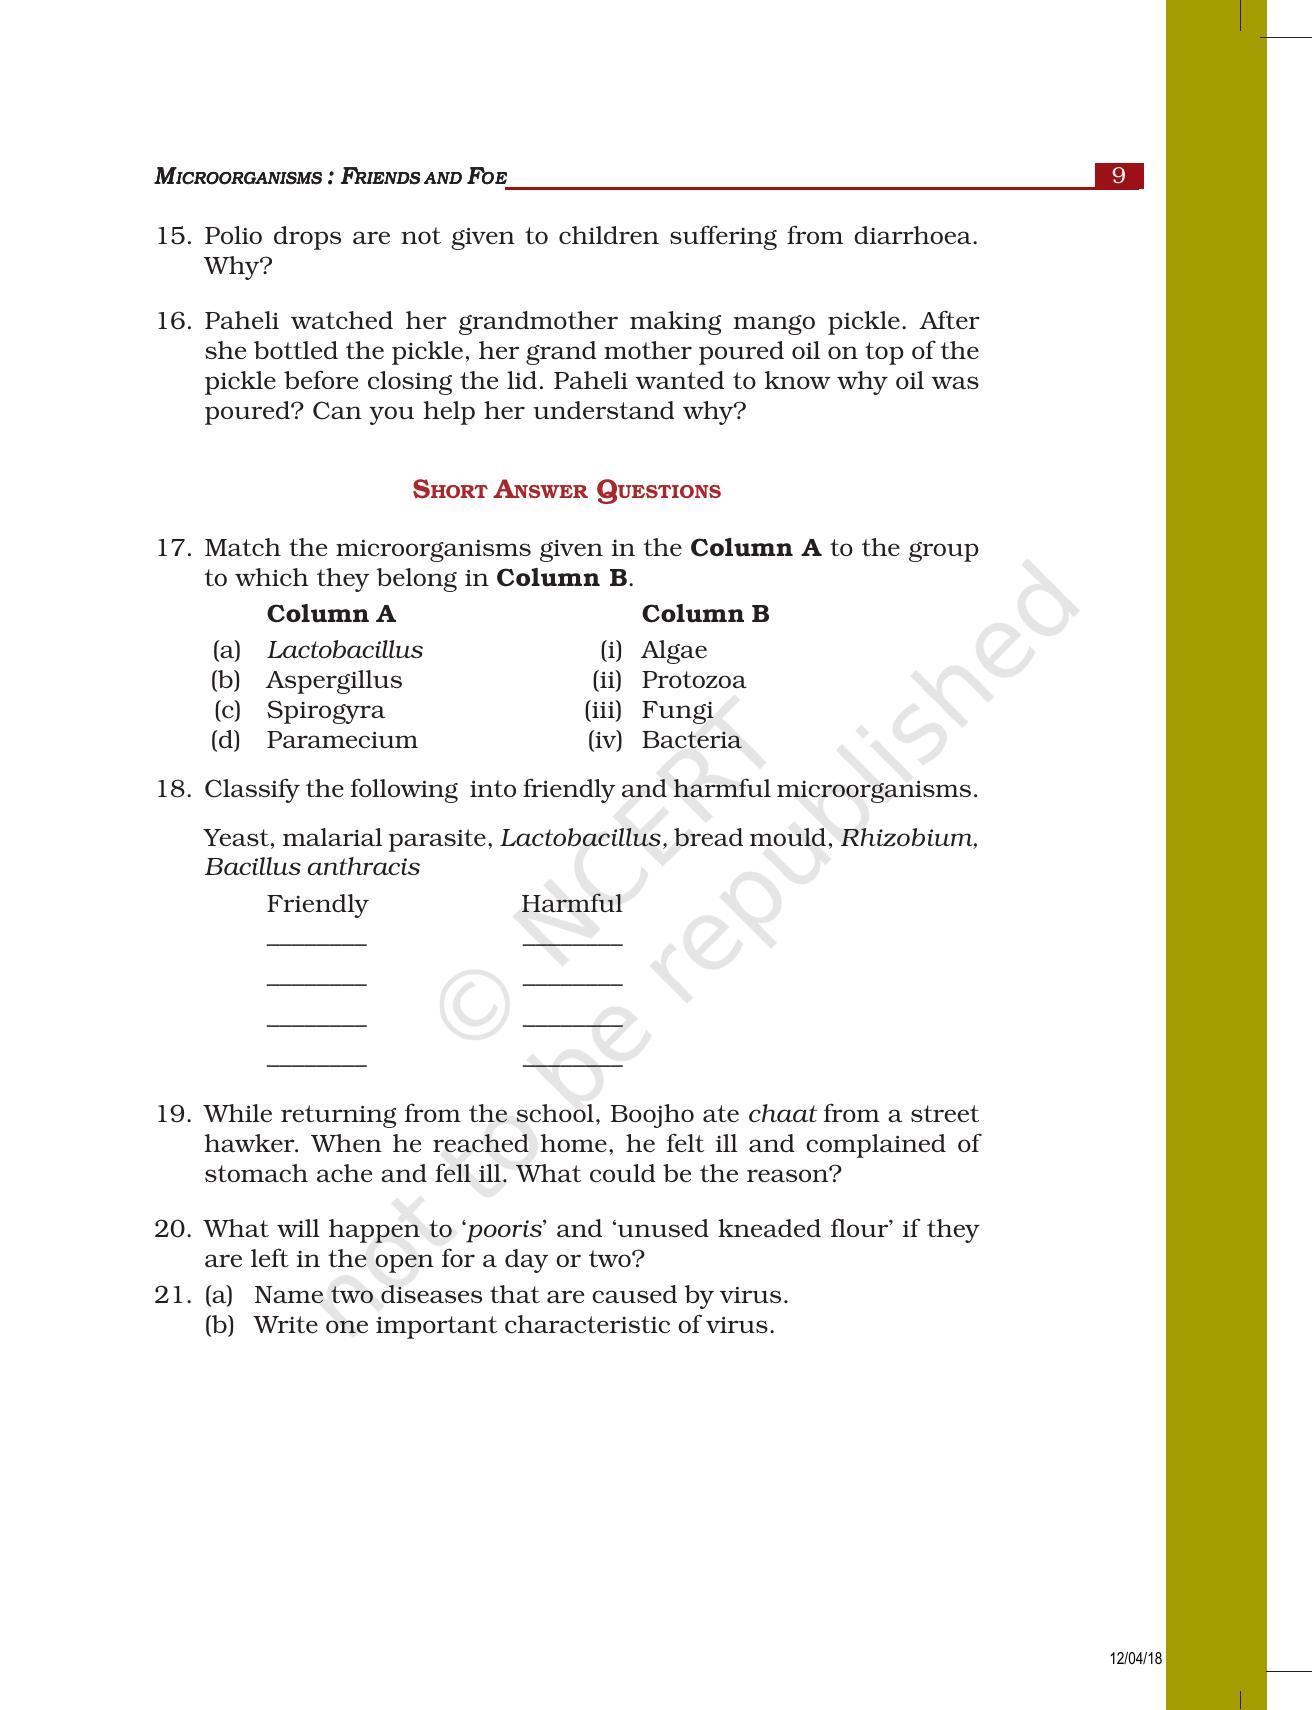 NCERT Exemplar Book for Class 8 Science: Chapter 2- Microorganisms : Friend and Foe - Page 3